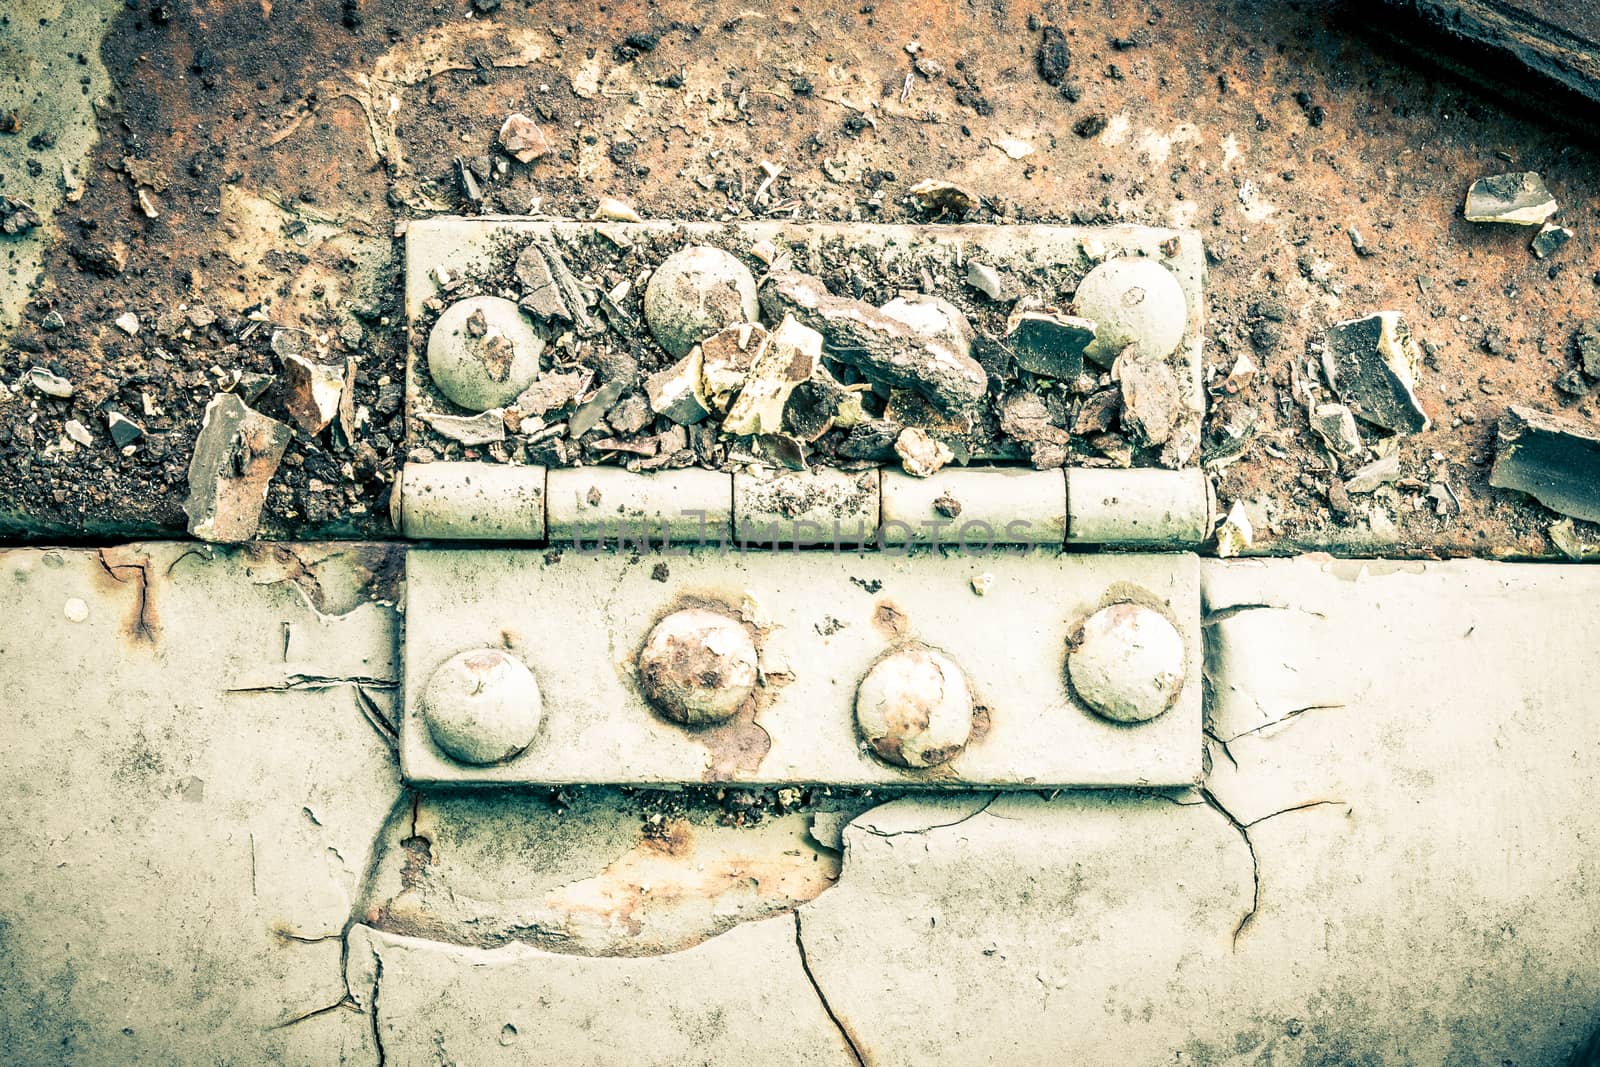 Old metal hinge and rust and rivet on old metal sheet of auto part in horizontal view high contrast style. Grunge or retro or old background for industry design.